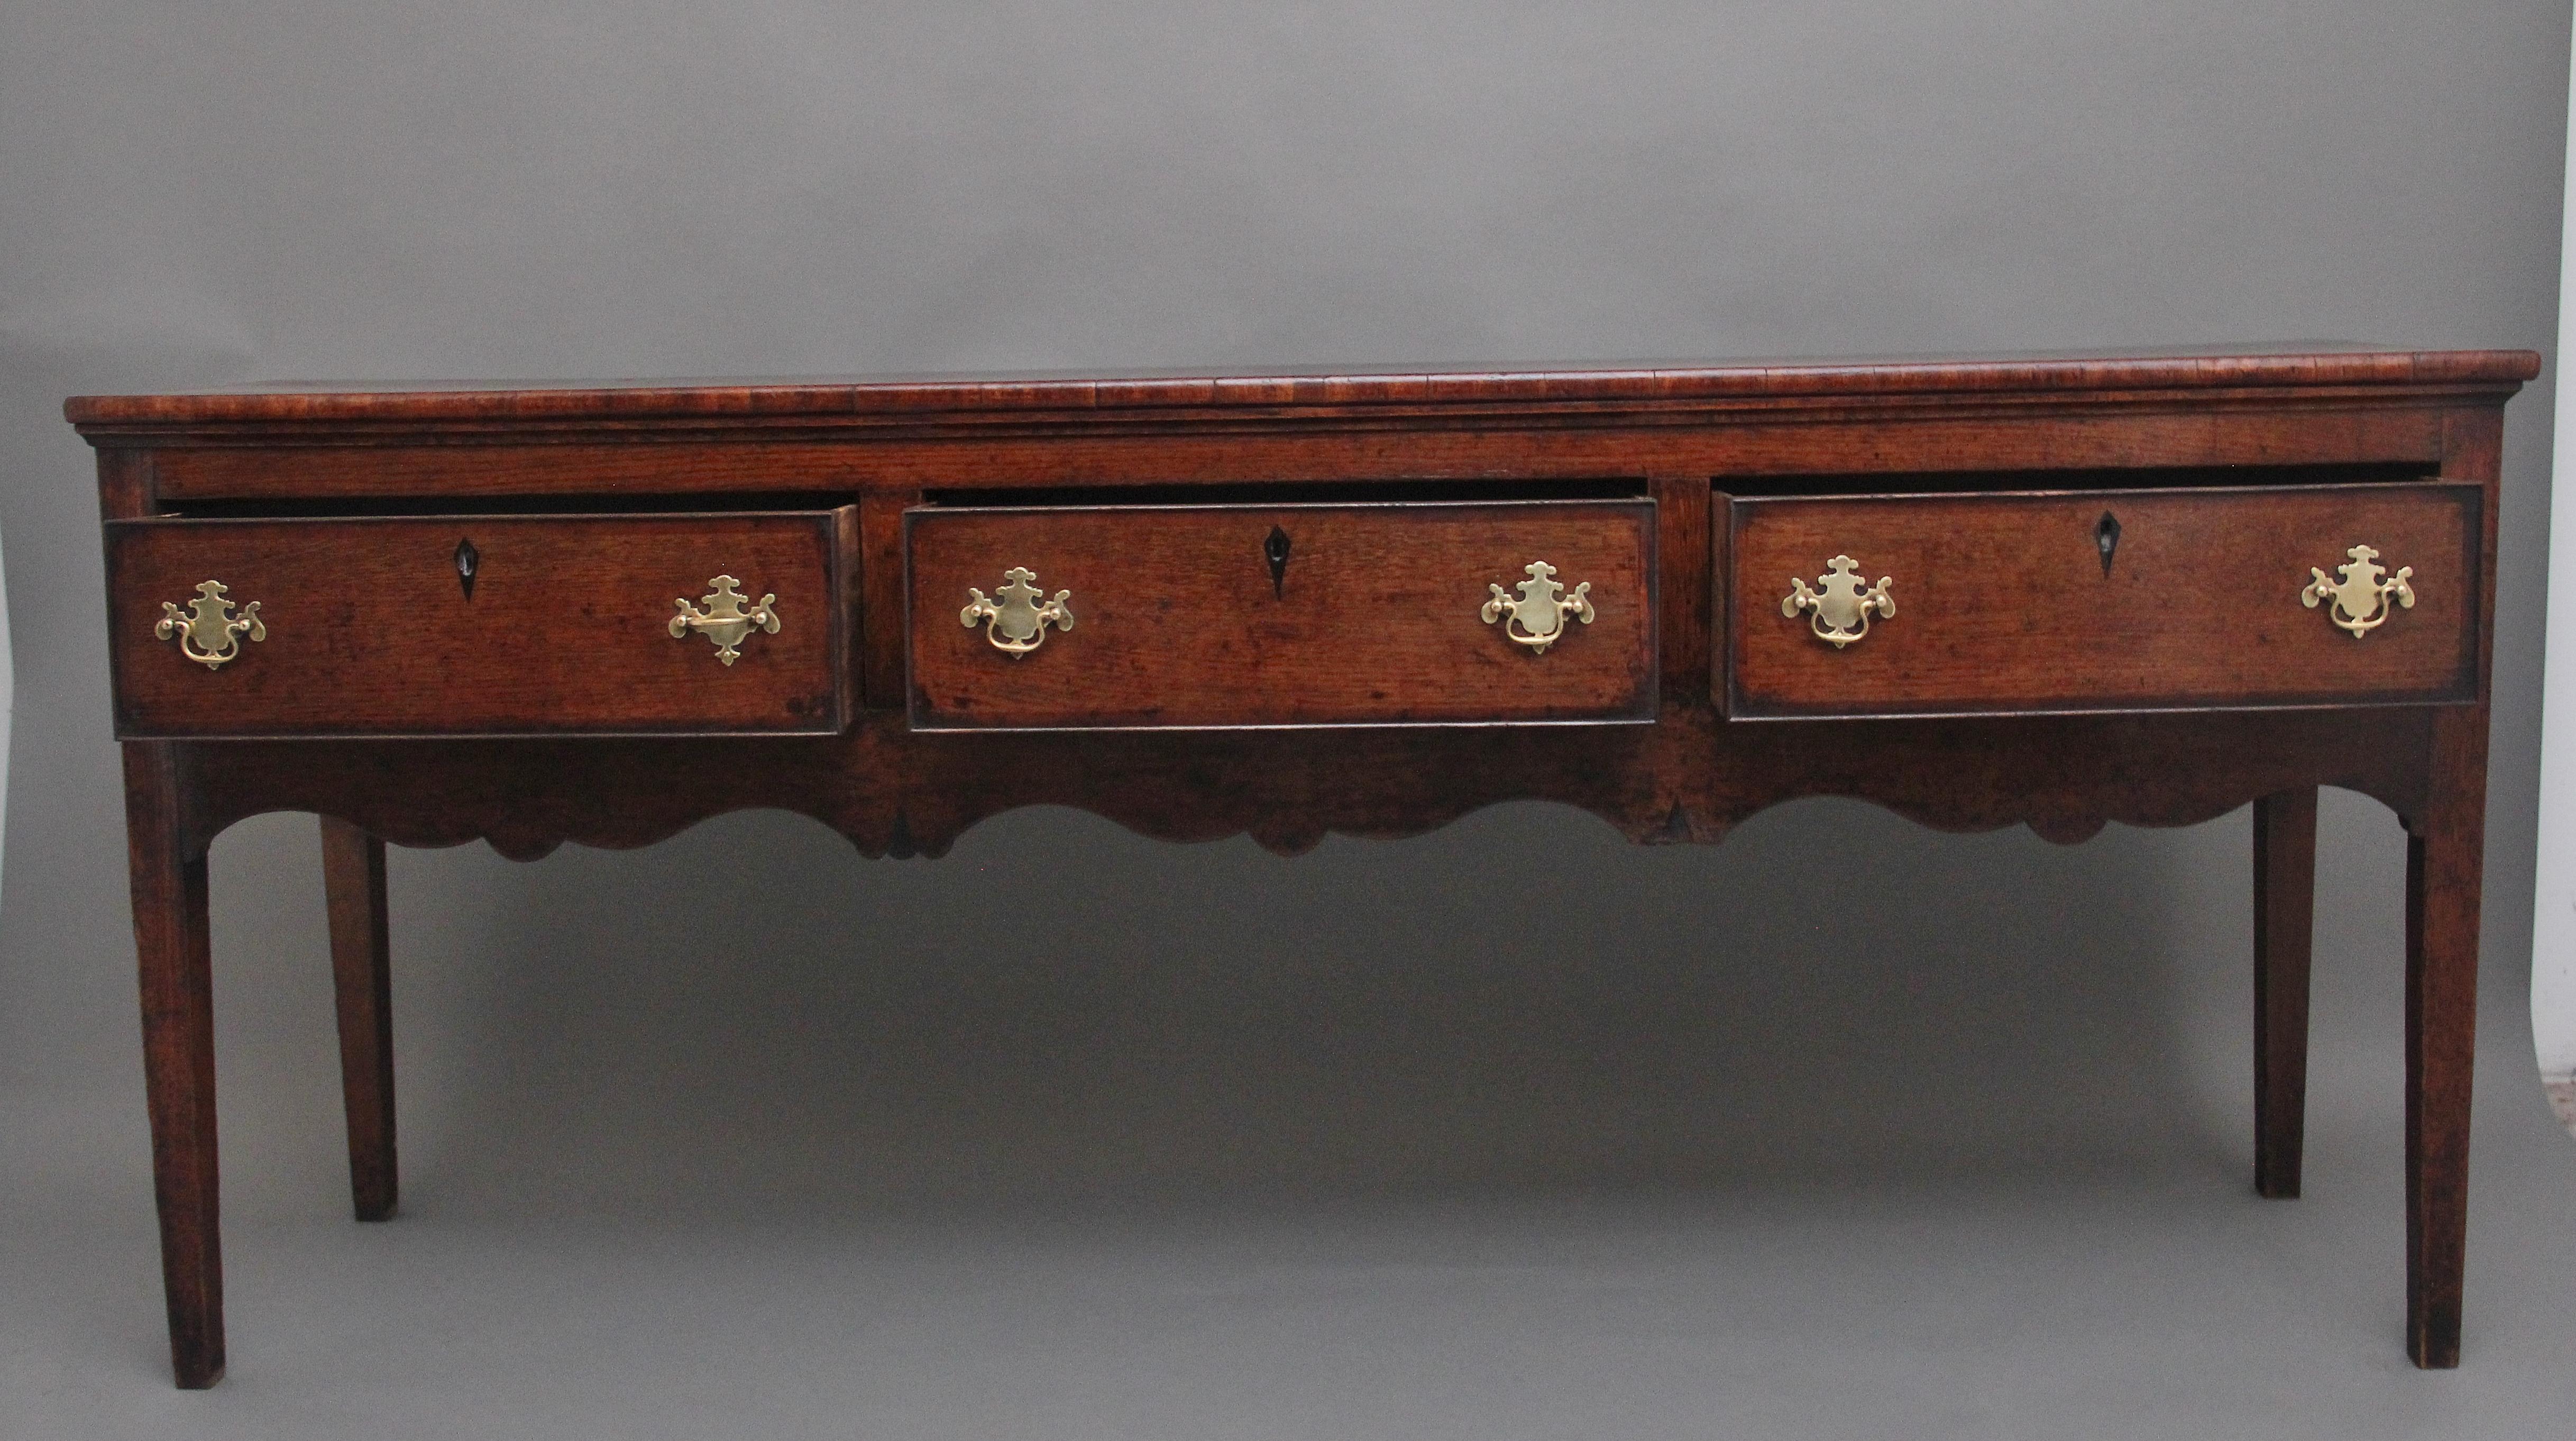 18th Century oak dresser base, having a lovely figured top above three deep drawers with brass plate handles, crossbanded on the drawer fronts, with a decorative shaped frieze below, panelled sides and supported on square legs.  In excellent